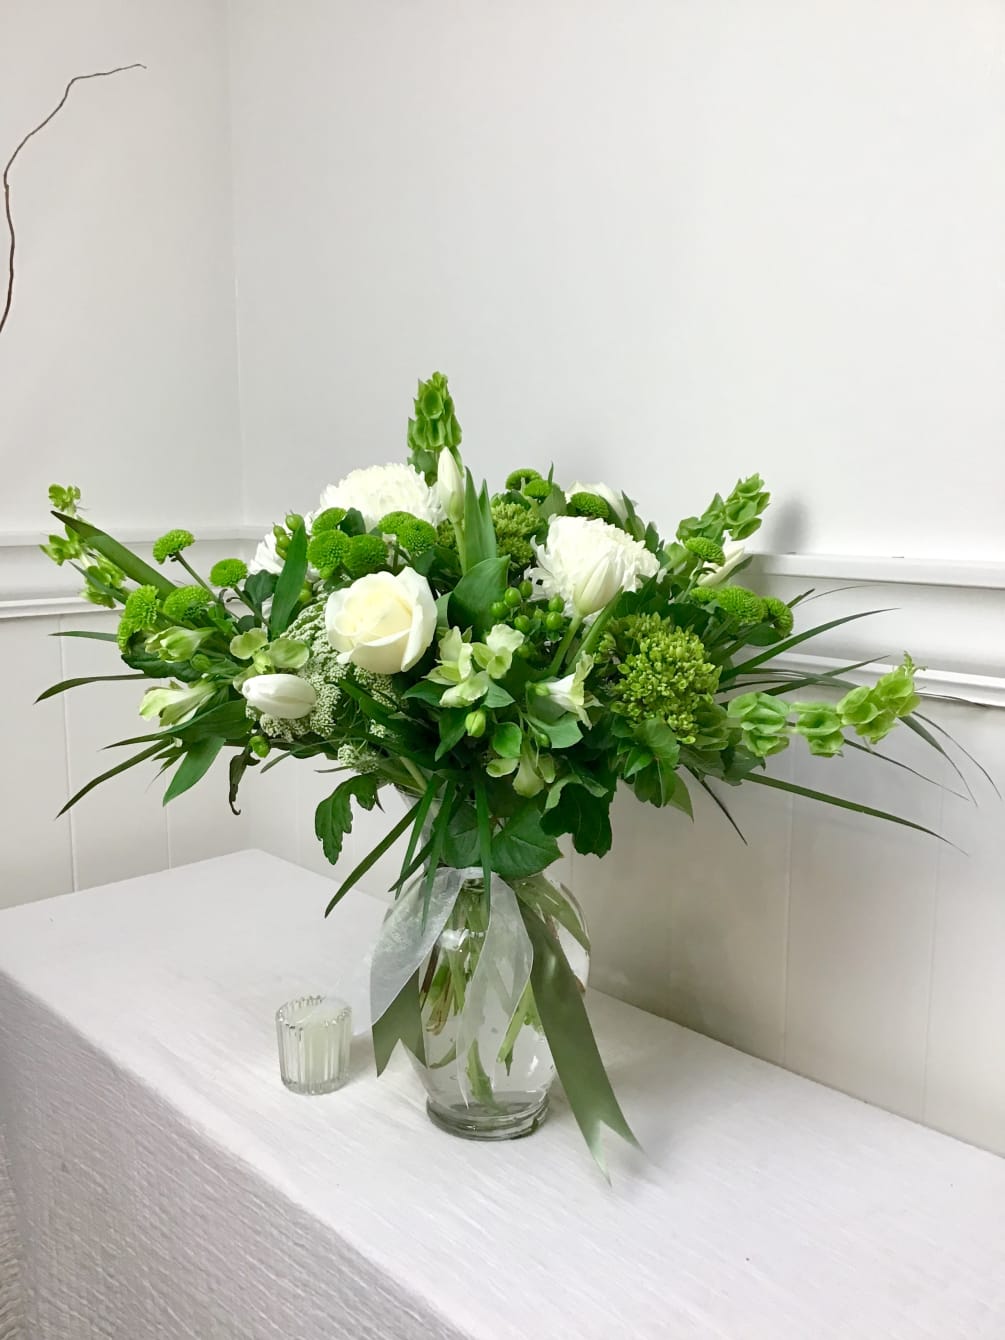 This grand arrangement is an abundant mix of green and white flowers.